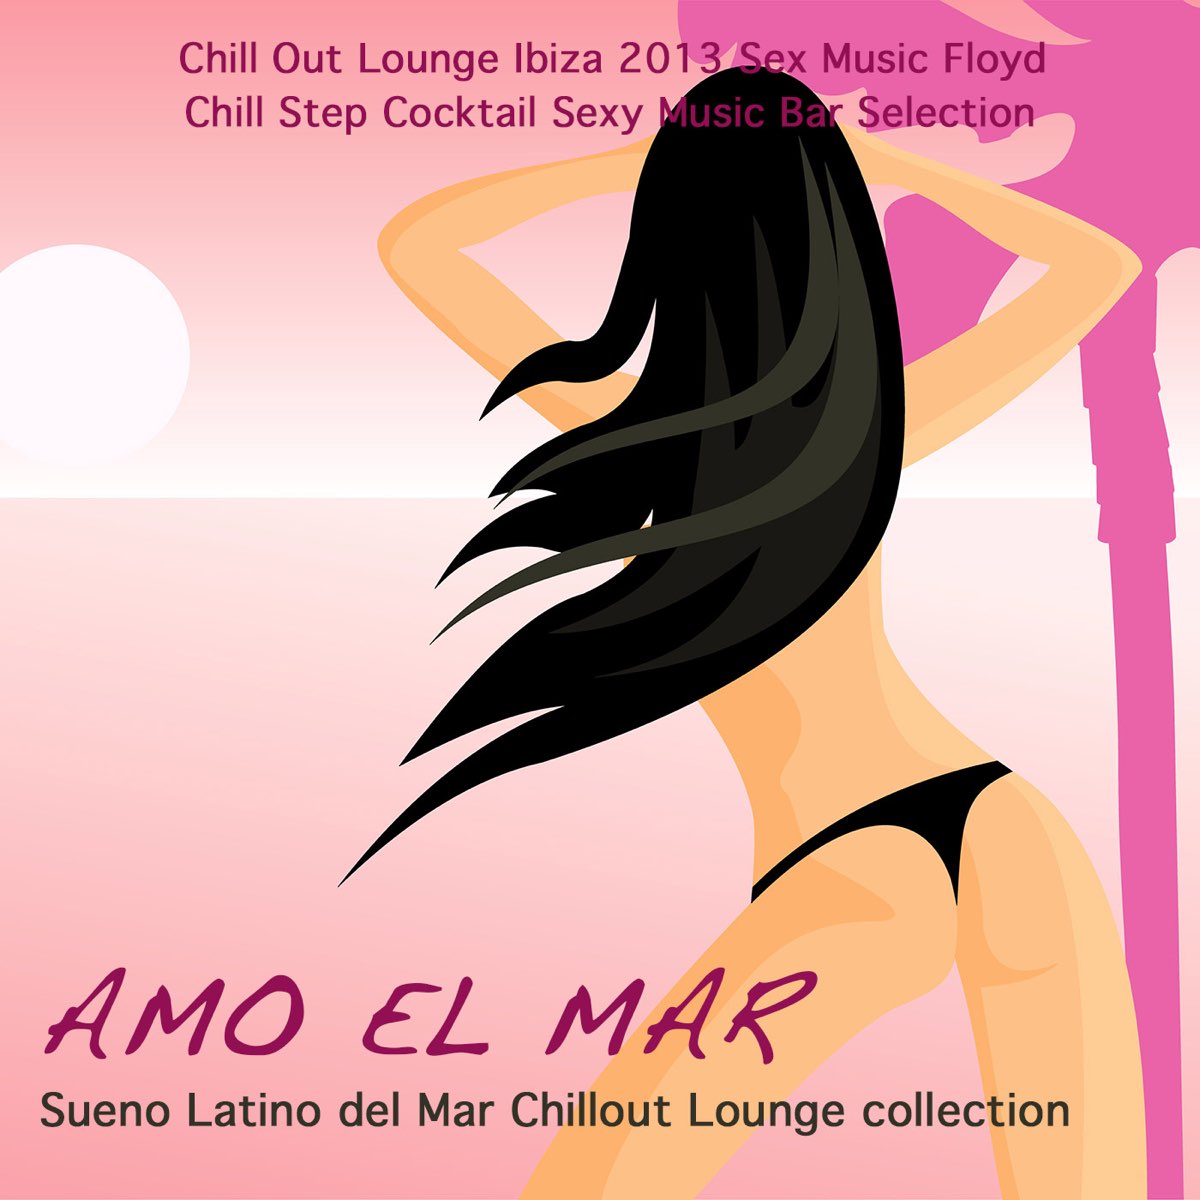 Amo el Mar: Chill Out Lounge Ibiza 2013 Sex Music Floyd & Chill Step  Cocktail Sexy Music Bar Selection (Sueno Latino del Mar Chillout Lounge  collection) – Album par Pink Buddha Lounge